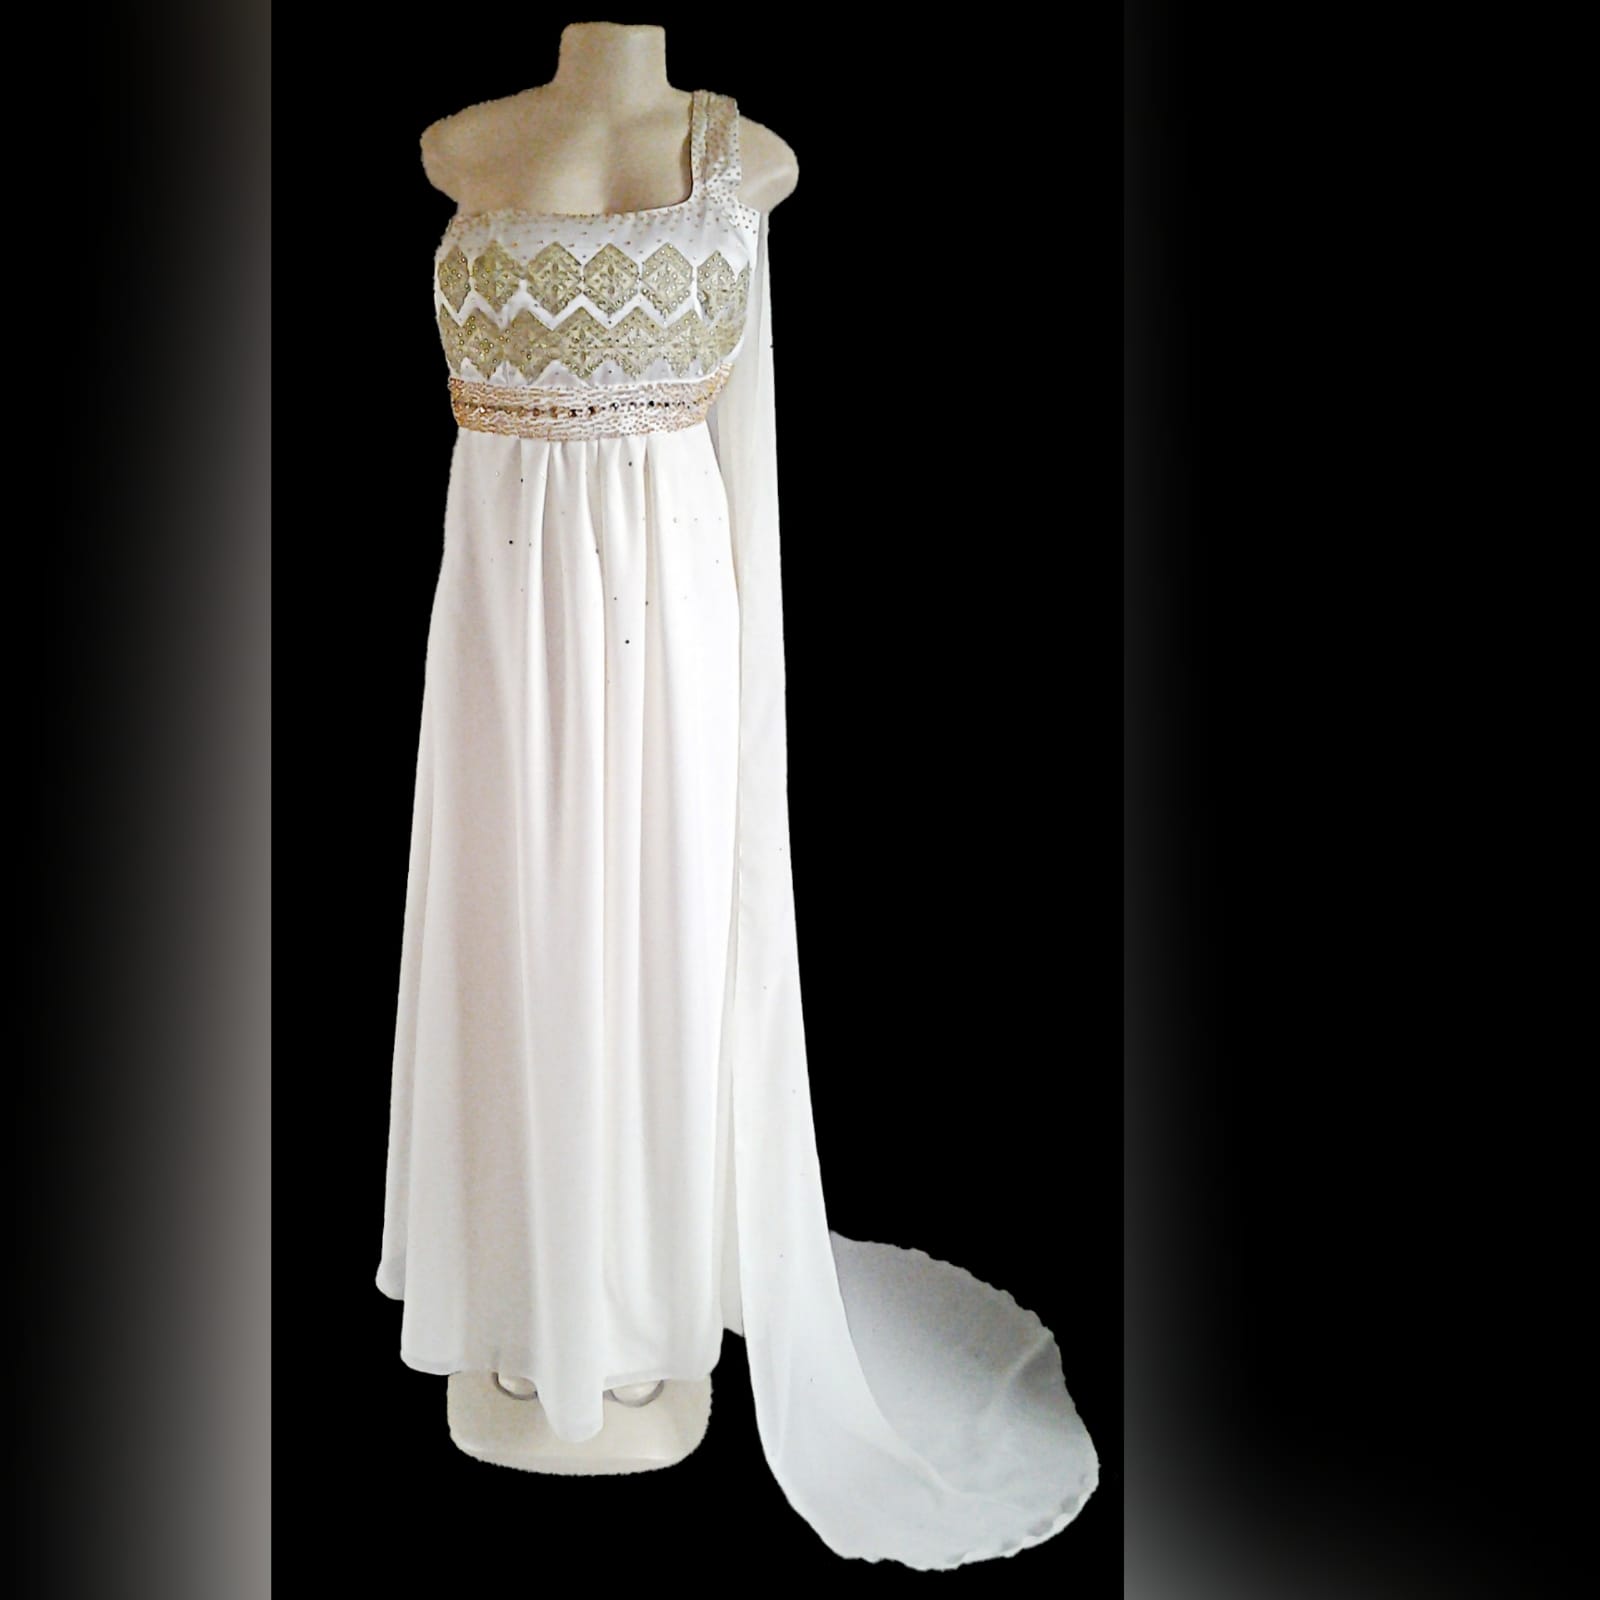 Ivory and olive green matric farewell dress 5 ivory long gathered matric farewell dress with bodice detailed in olive green lace embellishments with gold and bronze beads, with a one shoulder strap with an attached shoulder train.